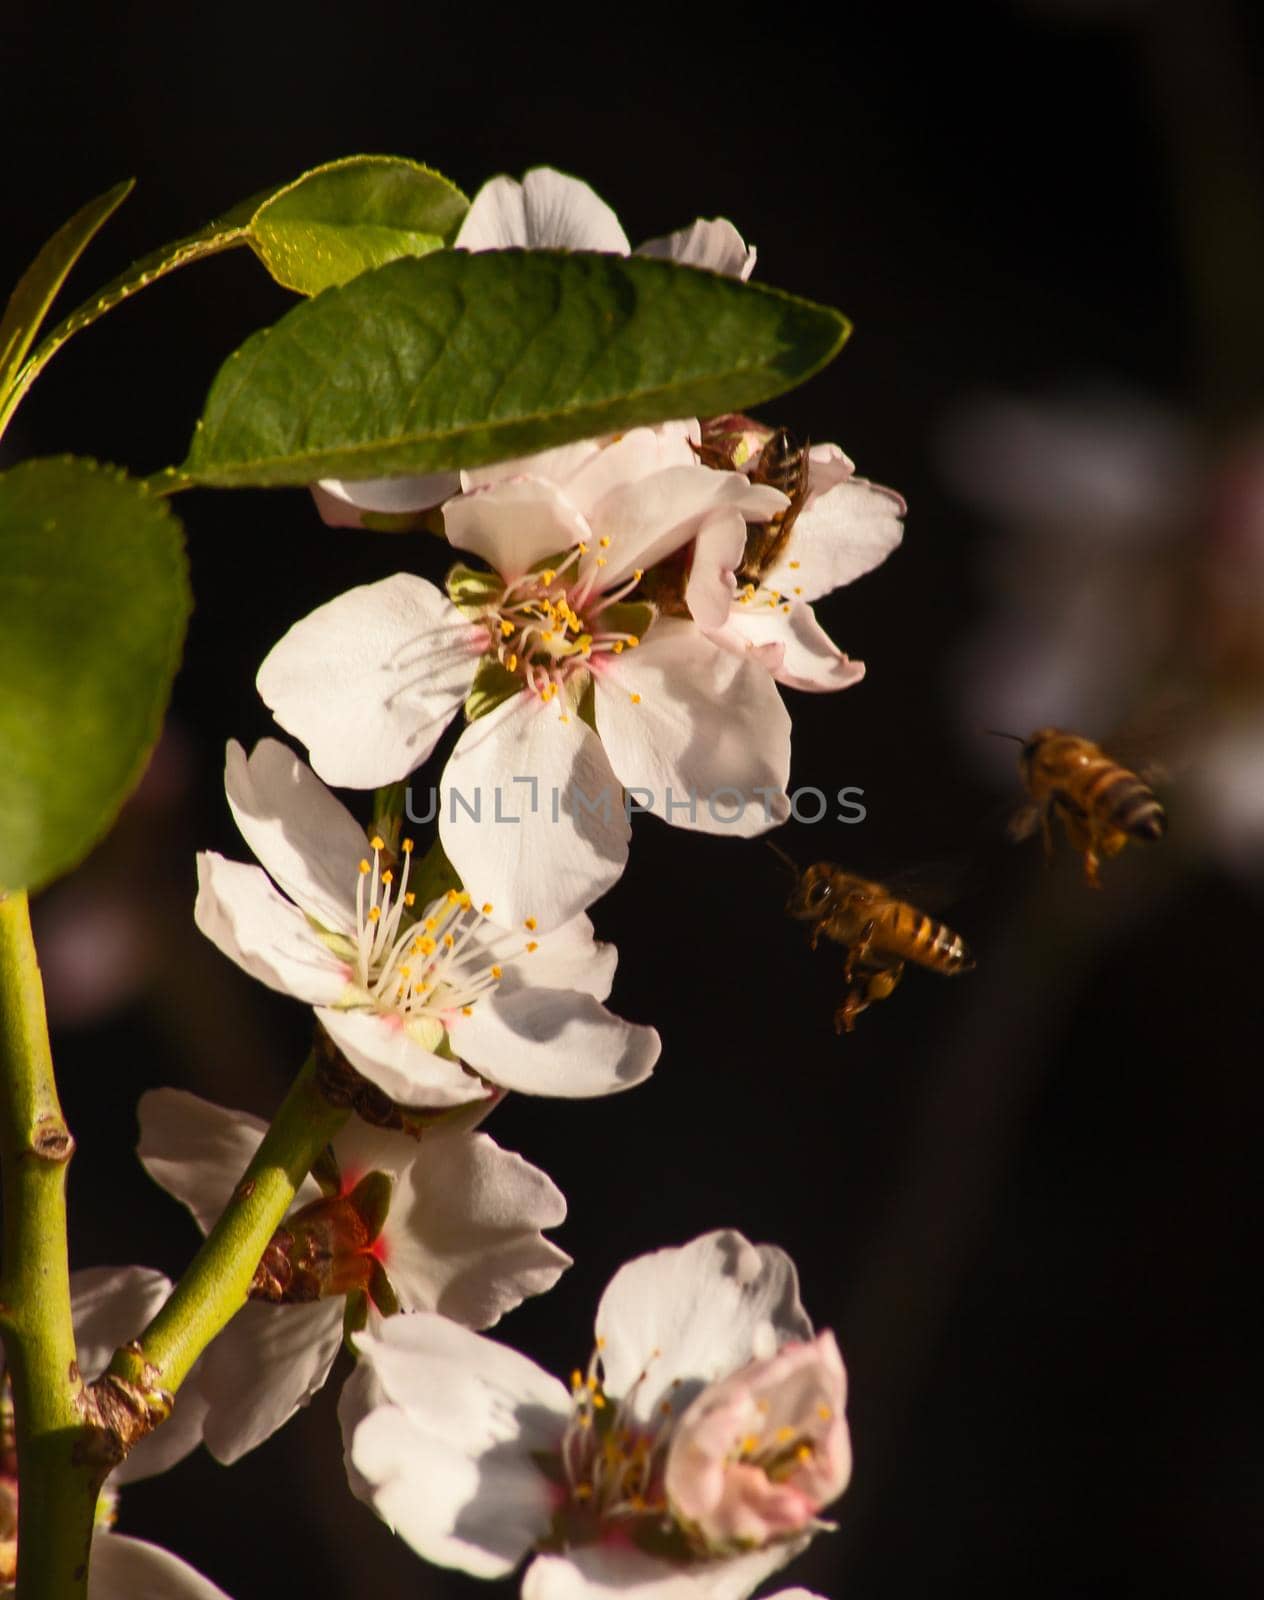 Almond Blossom with honeybee 13411 by kobus_peche